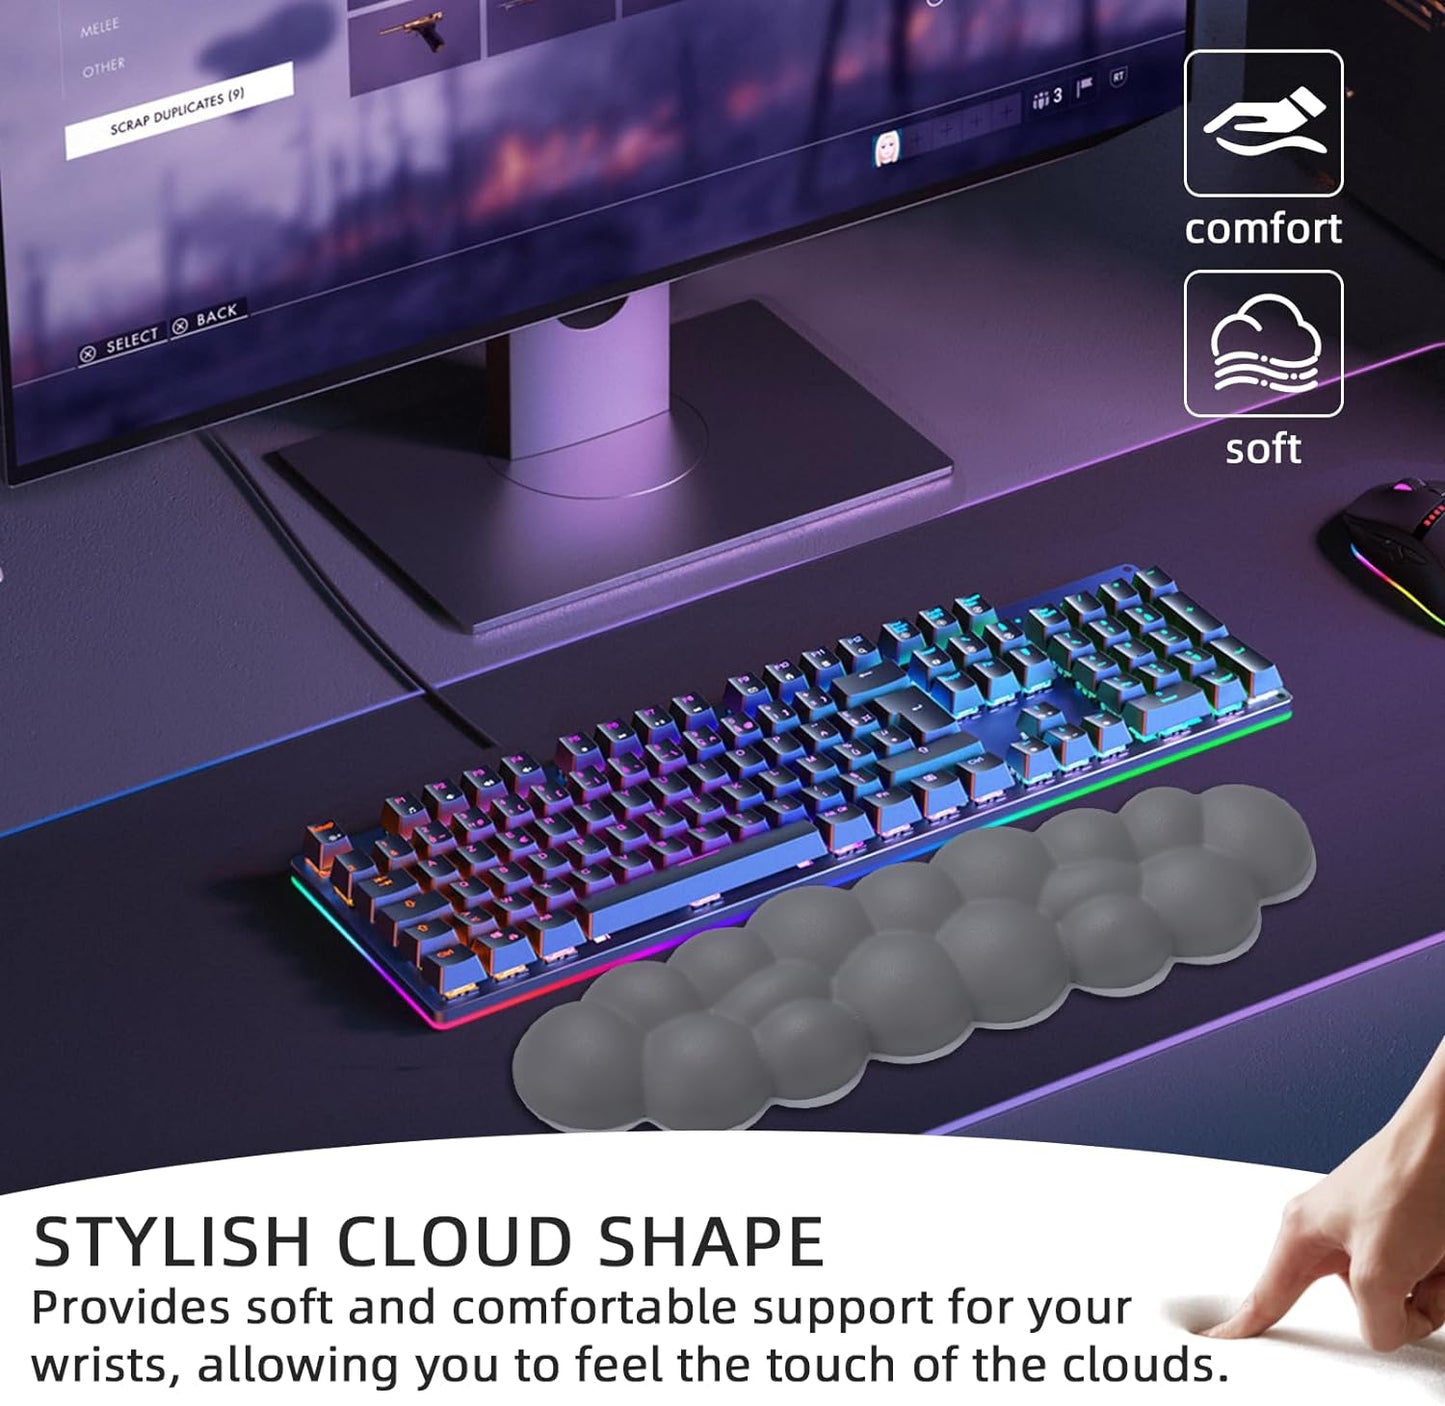 Cloud Wrist Rest for Computer Keyboard, Cute Wrist Pad for Keyboard, Wrist Support for Keyboard, Desk Accessories Keyboard Arm Rests for Wrists (Gray)